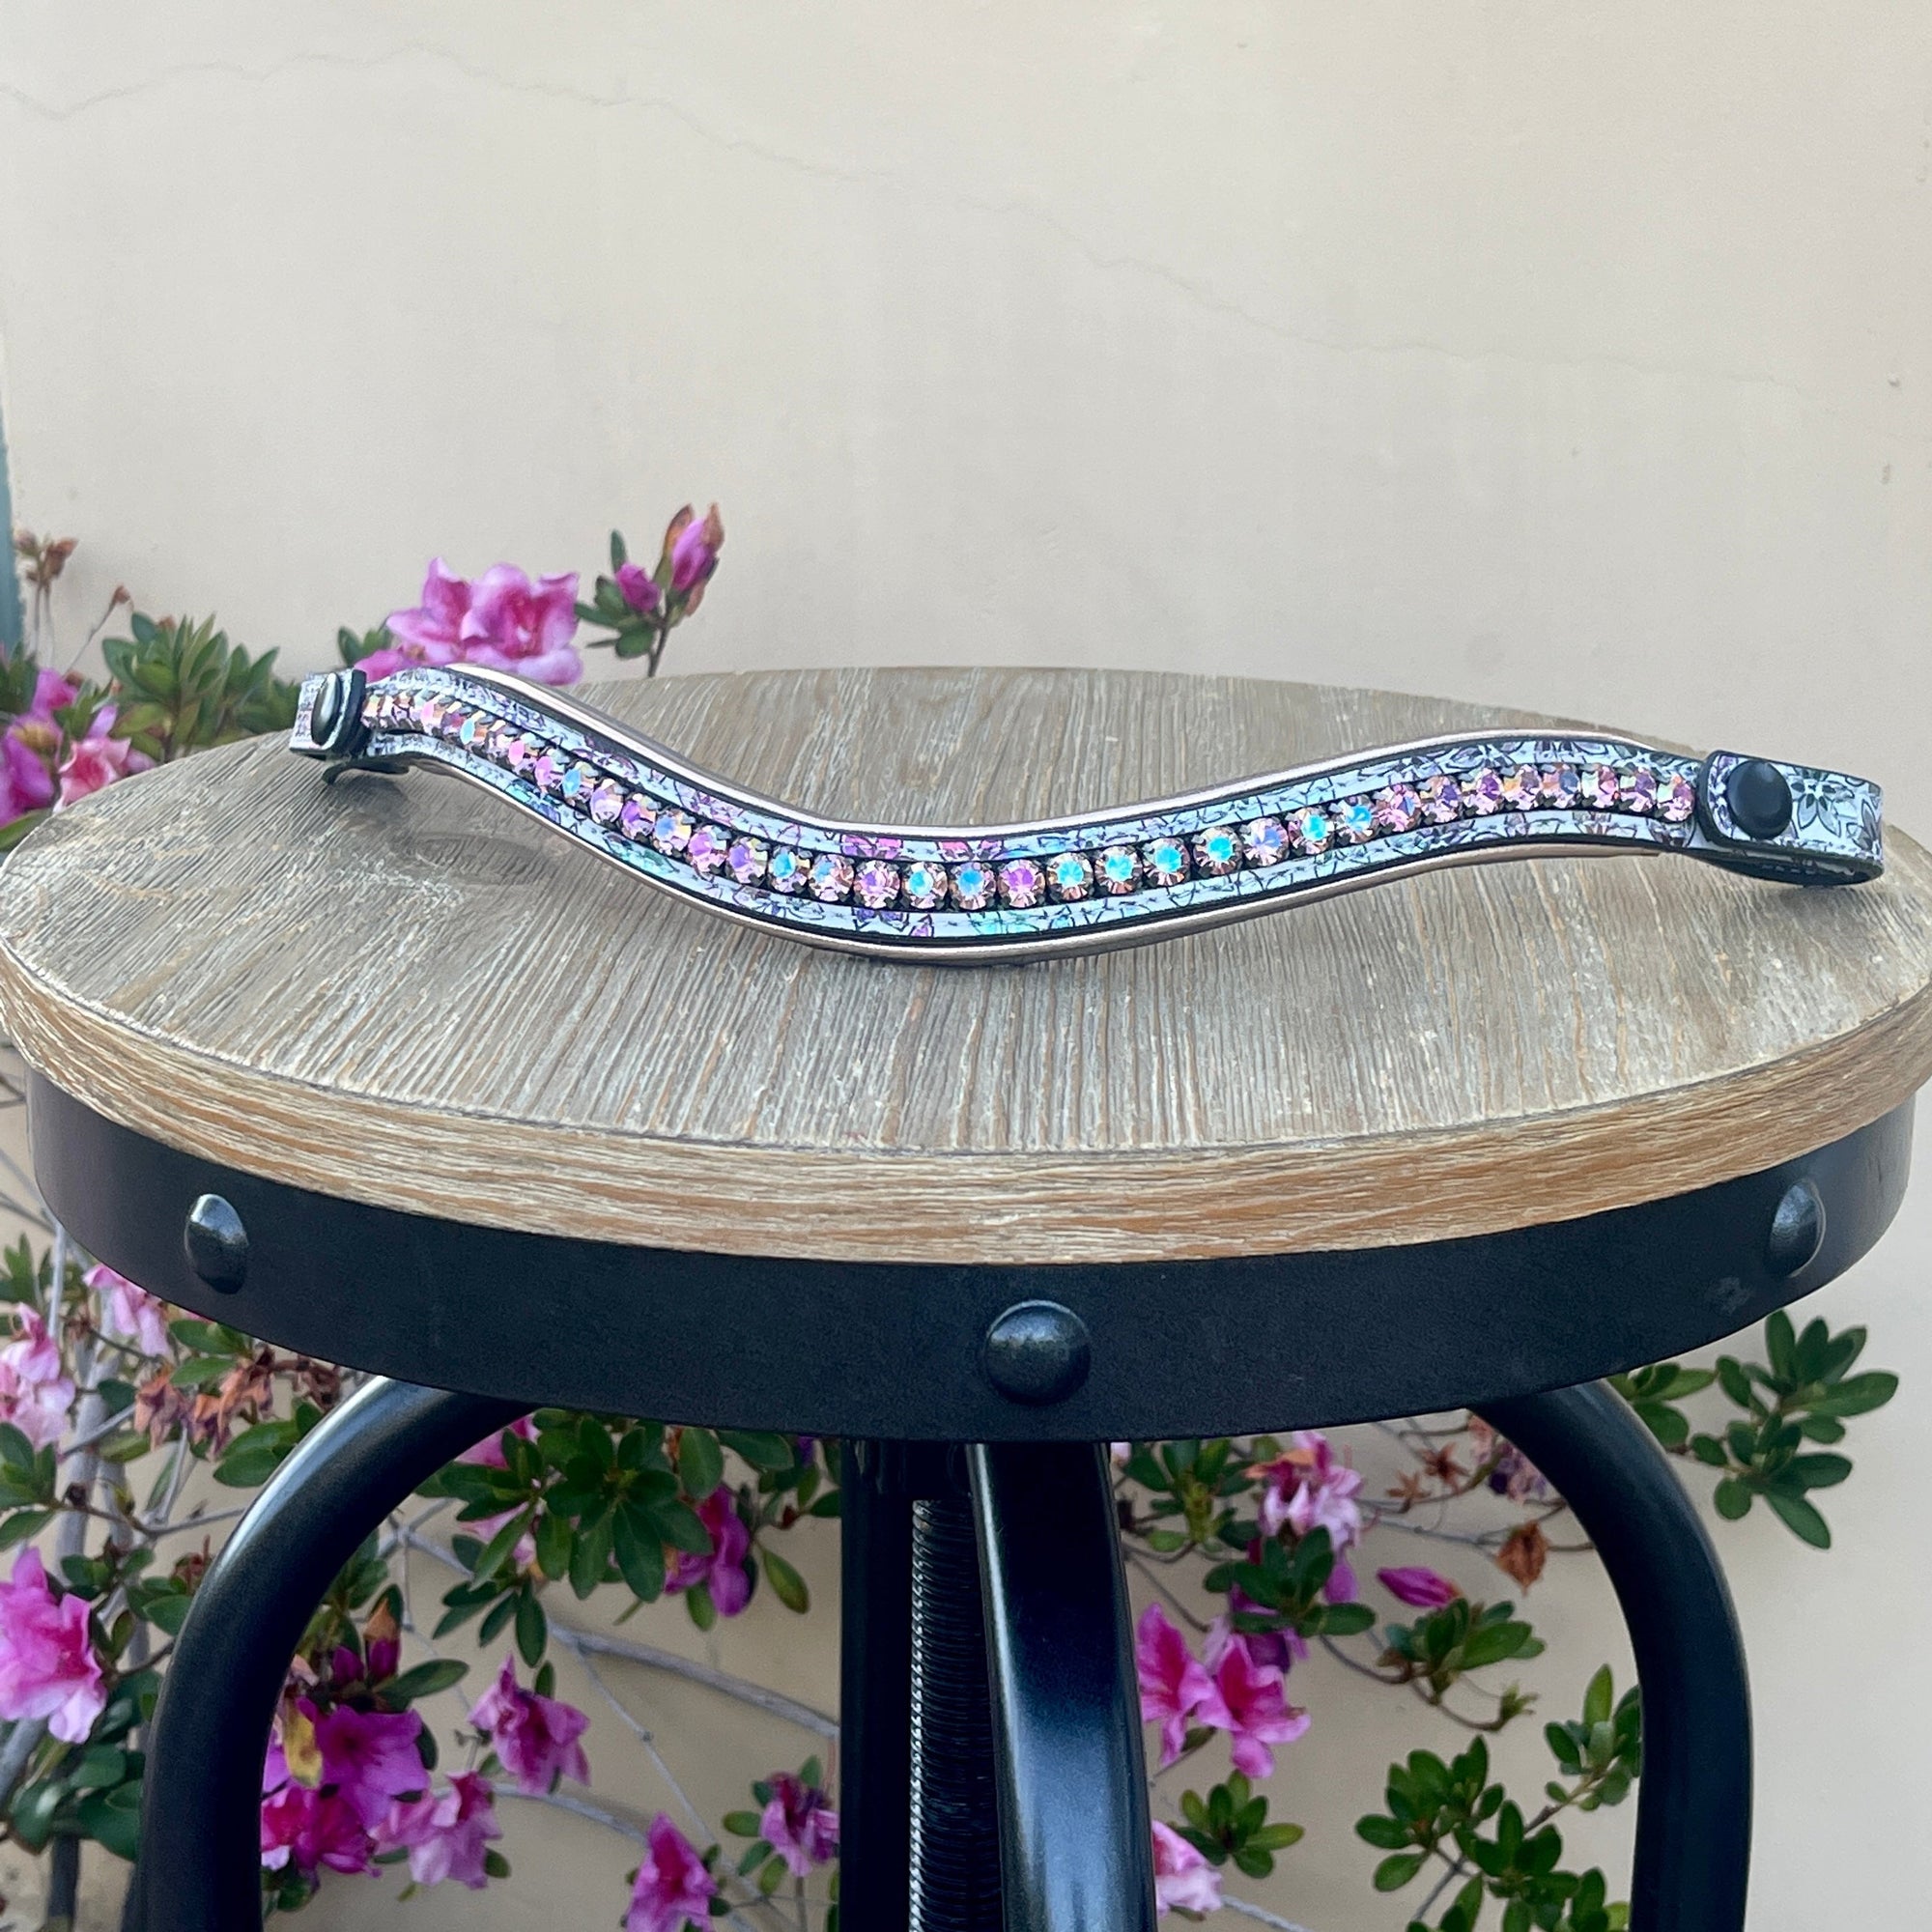 Limited Edition Versailles Crystal Browband